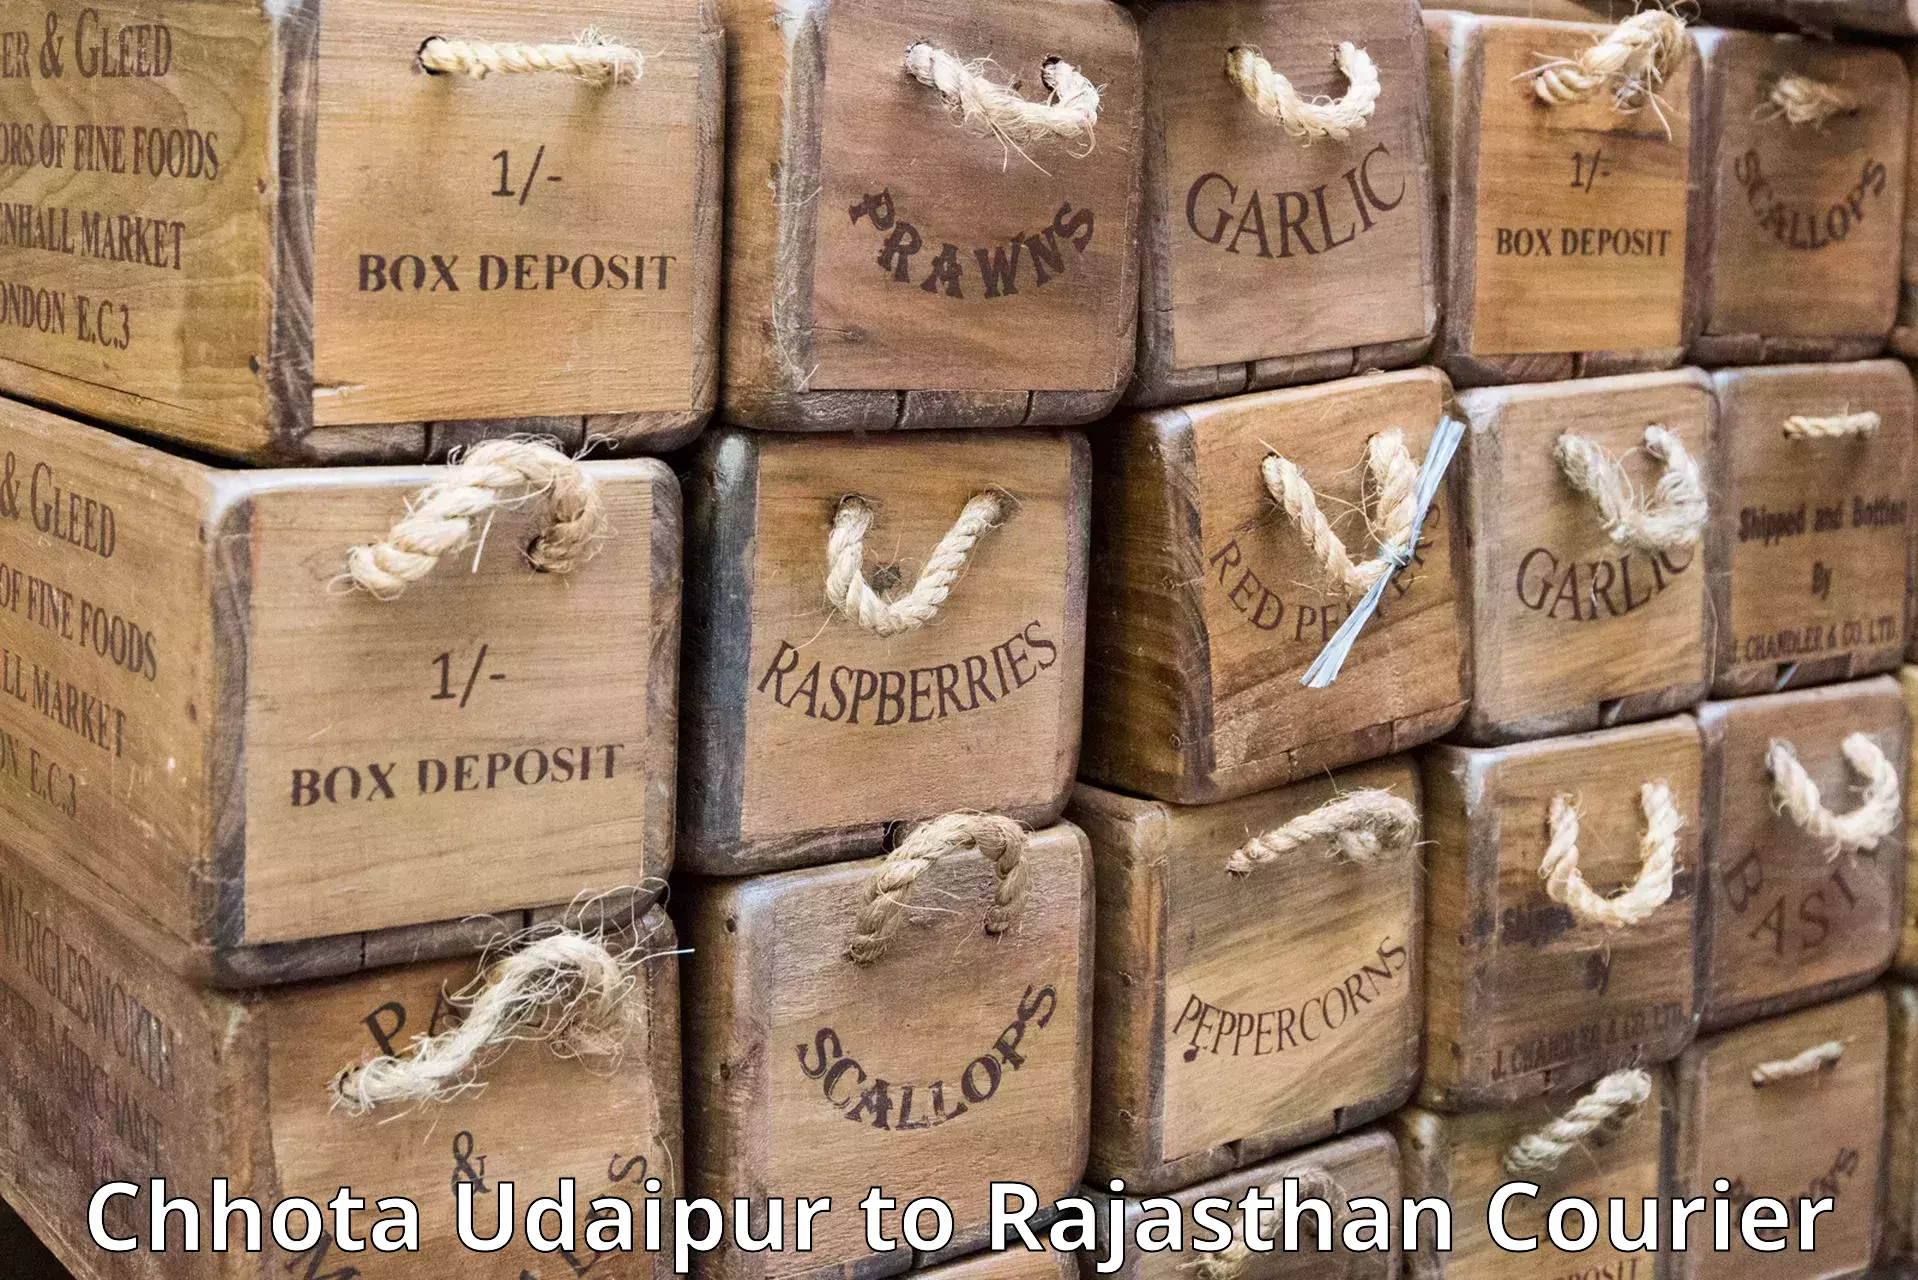 Full-service courier options Chhota Udaipur to Deogarh Rajsamand